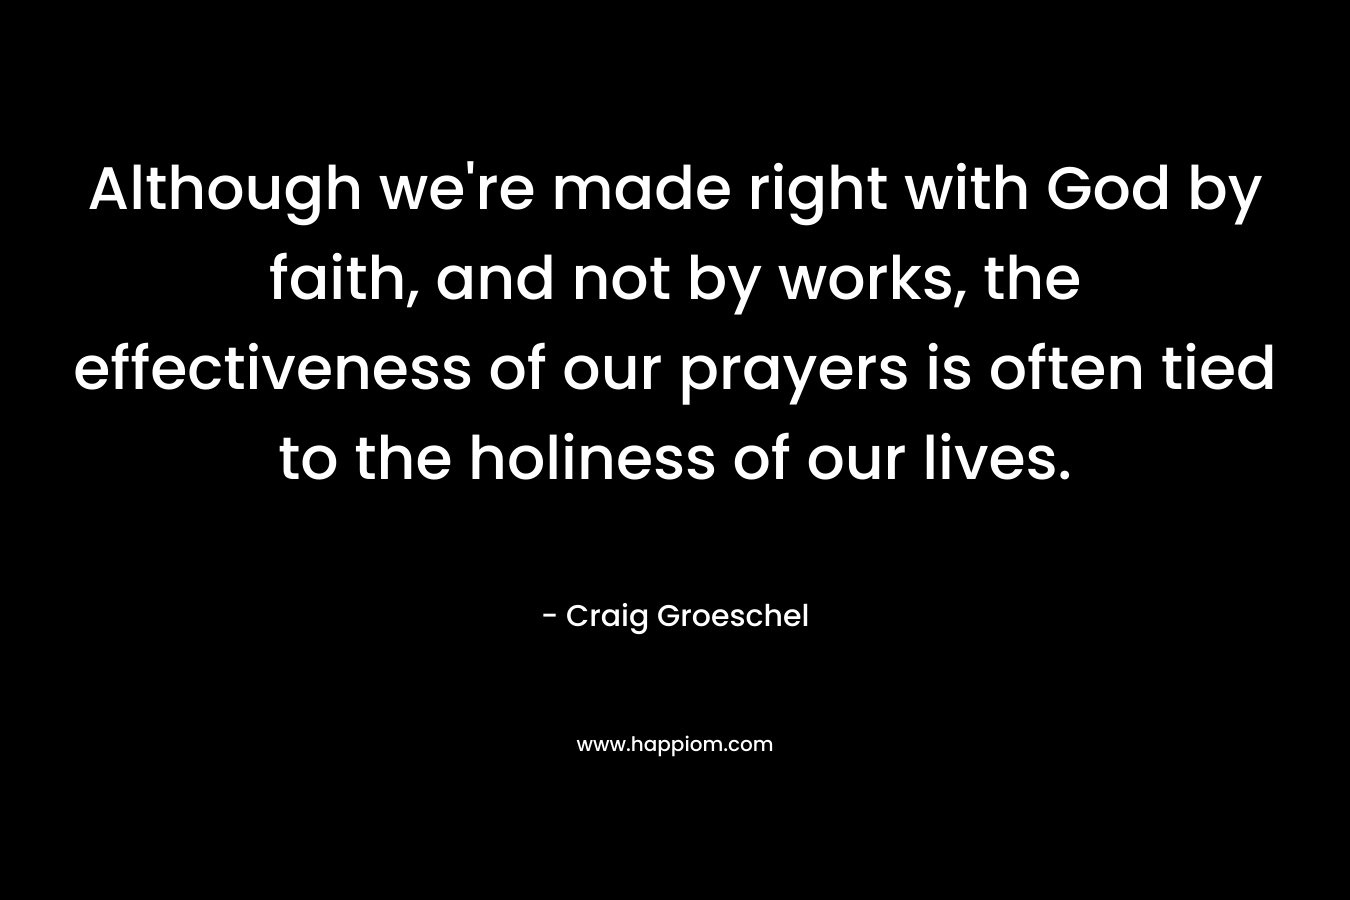 Although we’re made right with God by faith, and not by works, the effectiveness of our prayers is often tied to the holiness of our lives. – Craig Groeschel